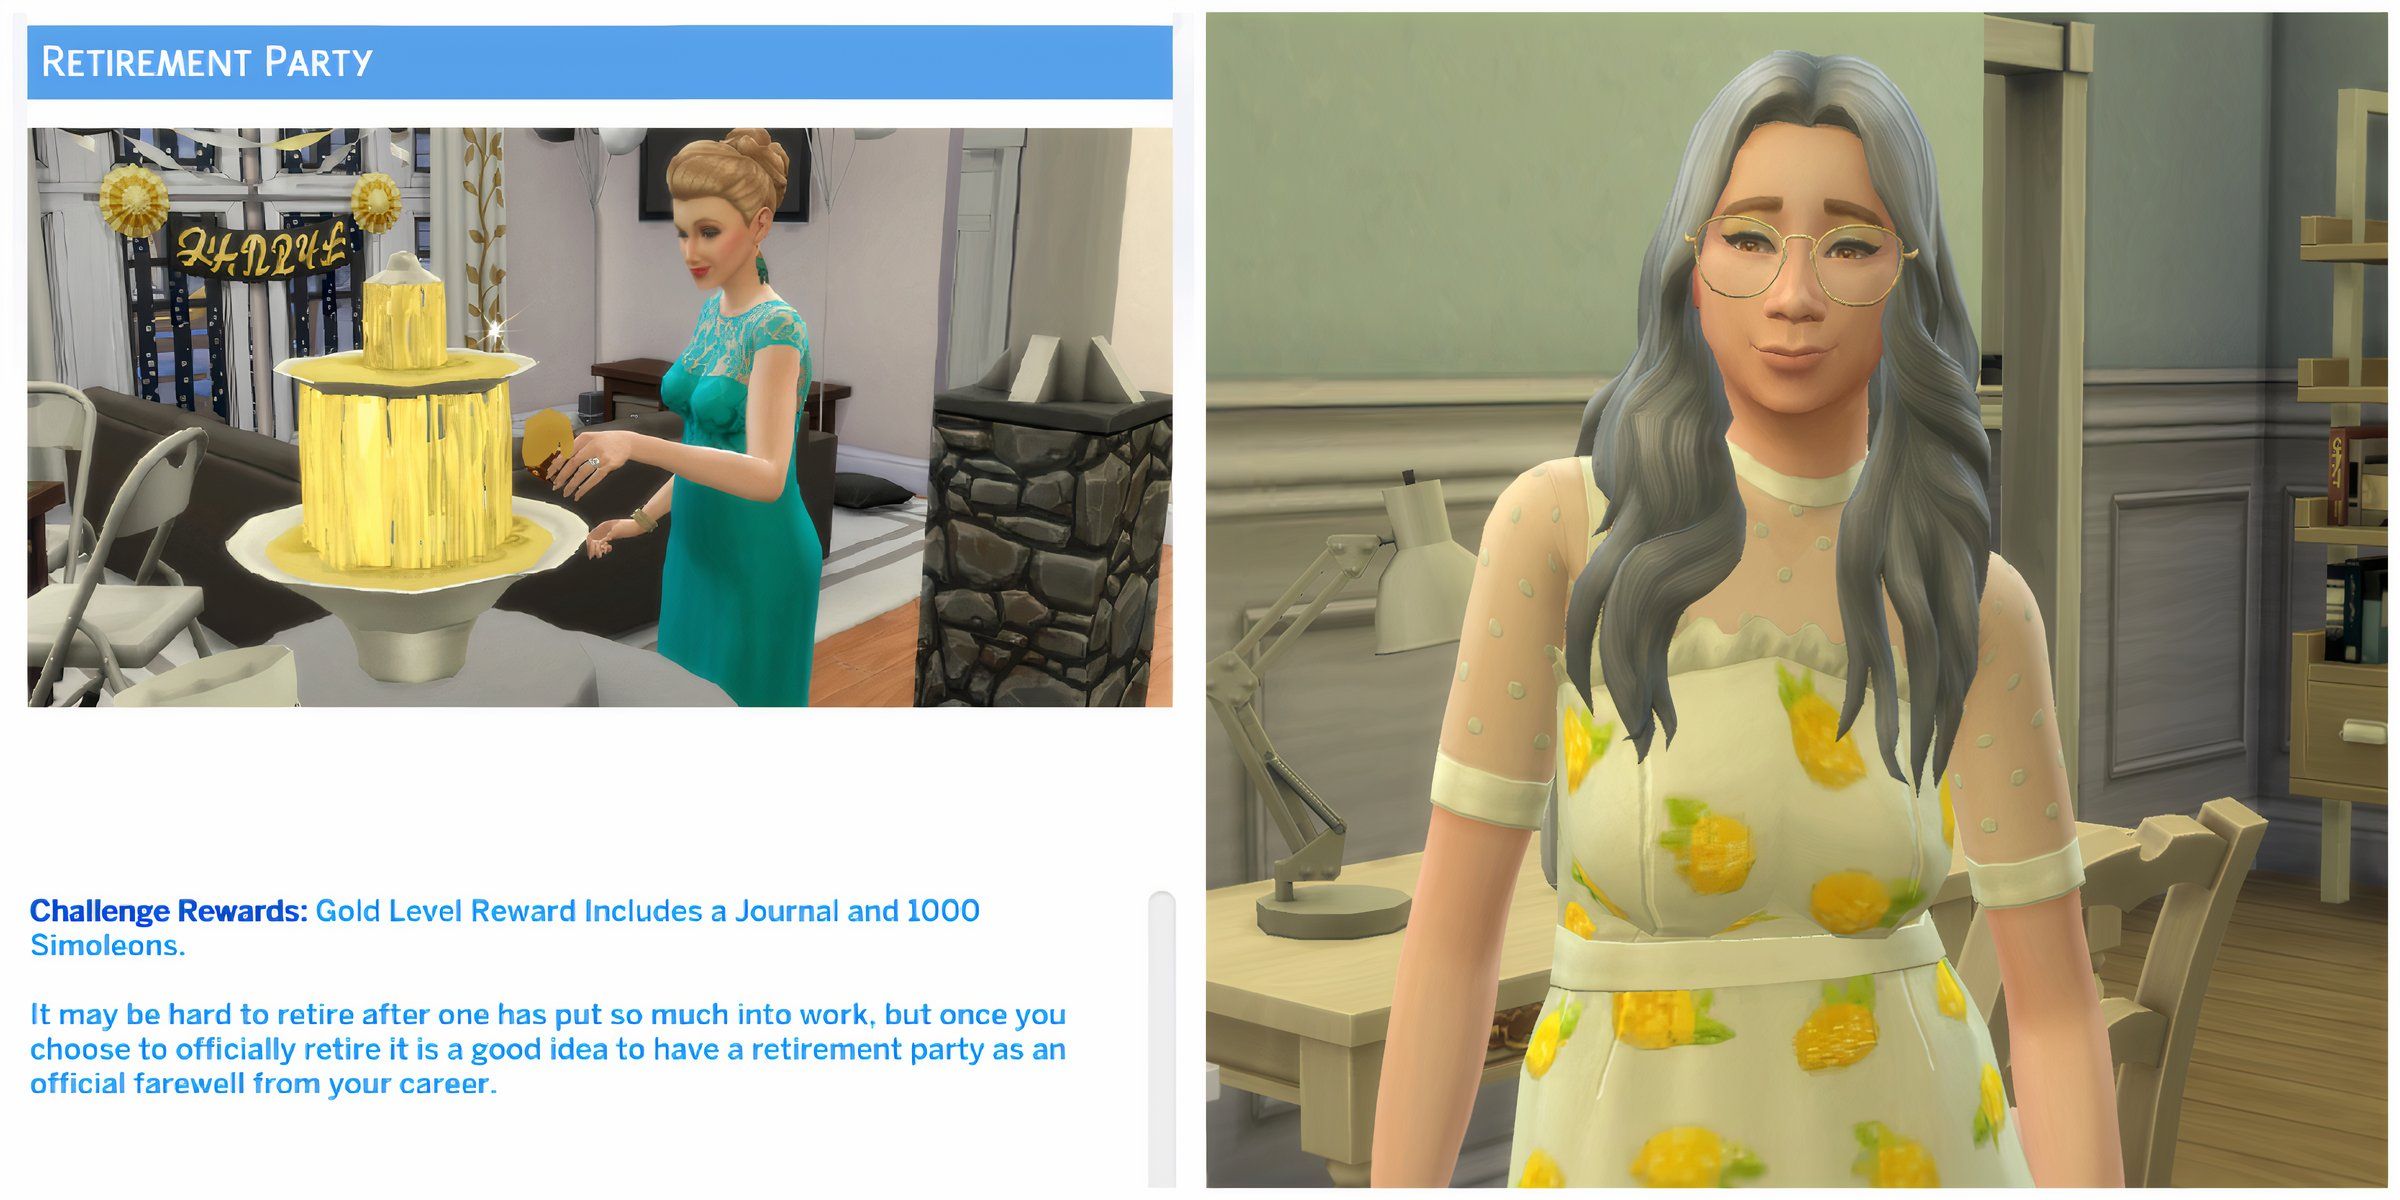 An elderly Sim and the description for the Retirement Party